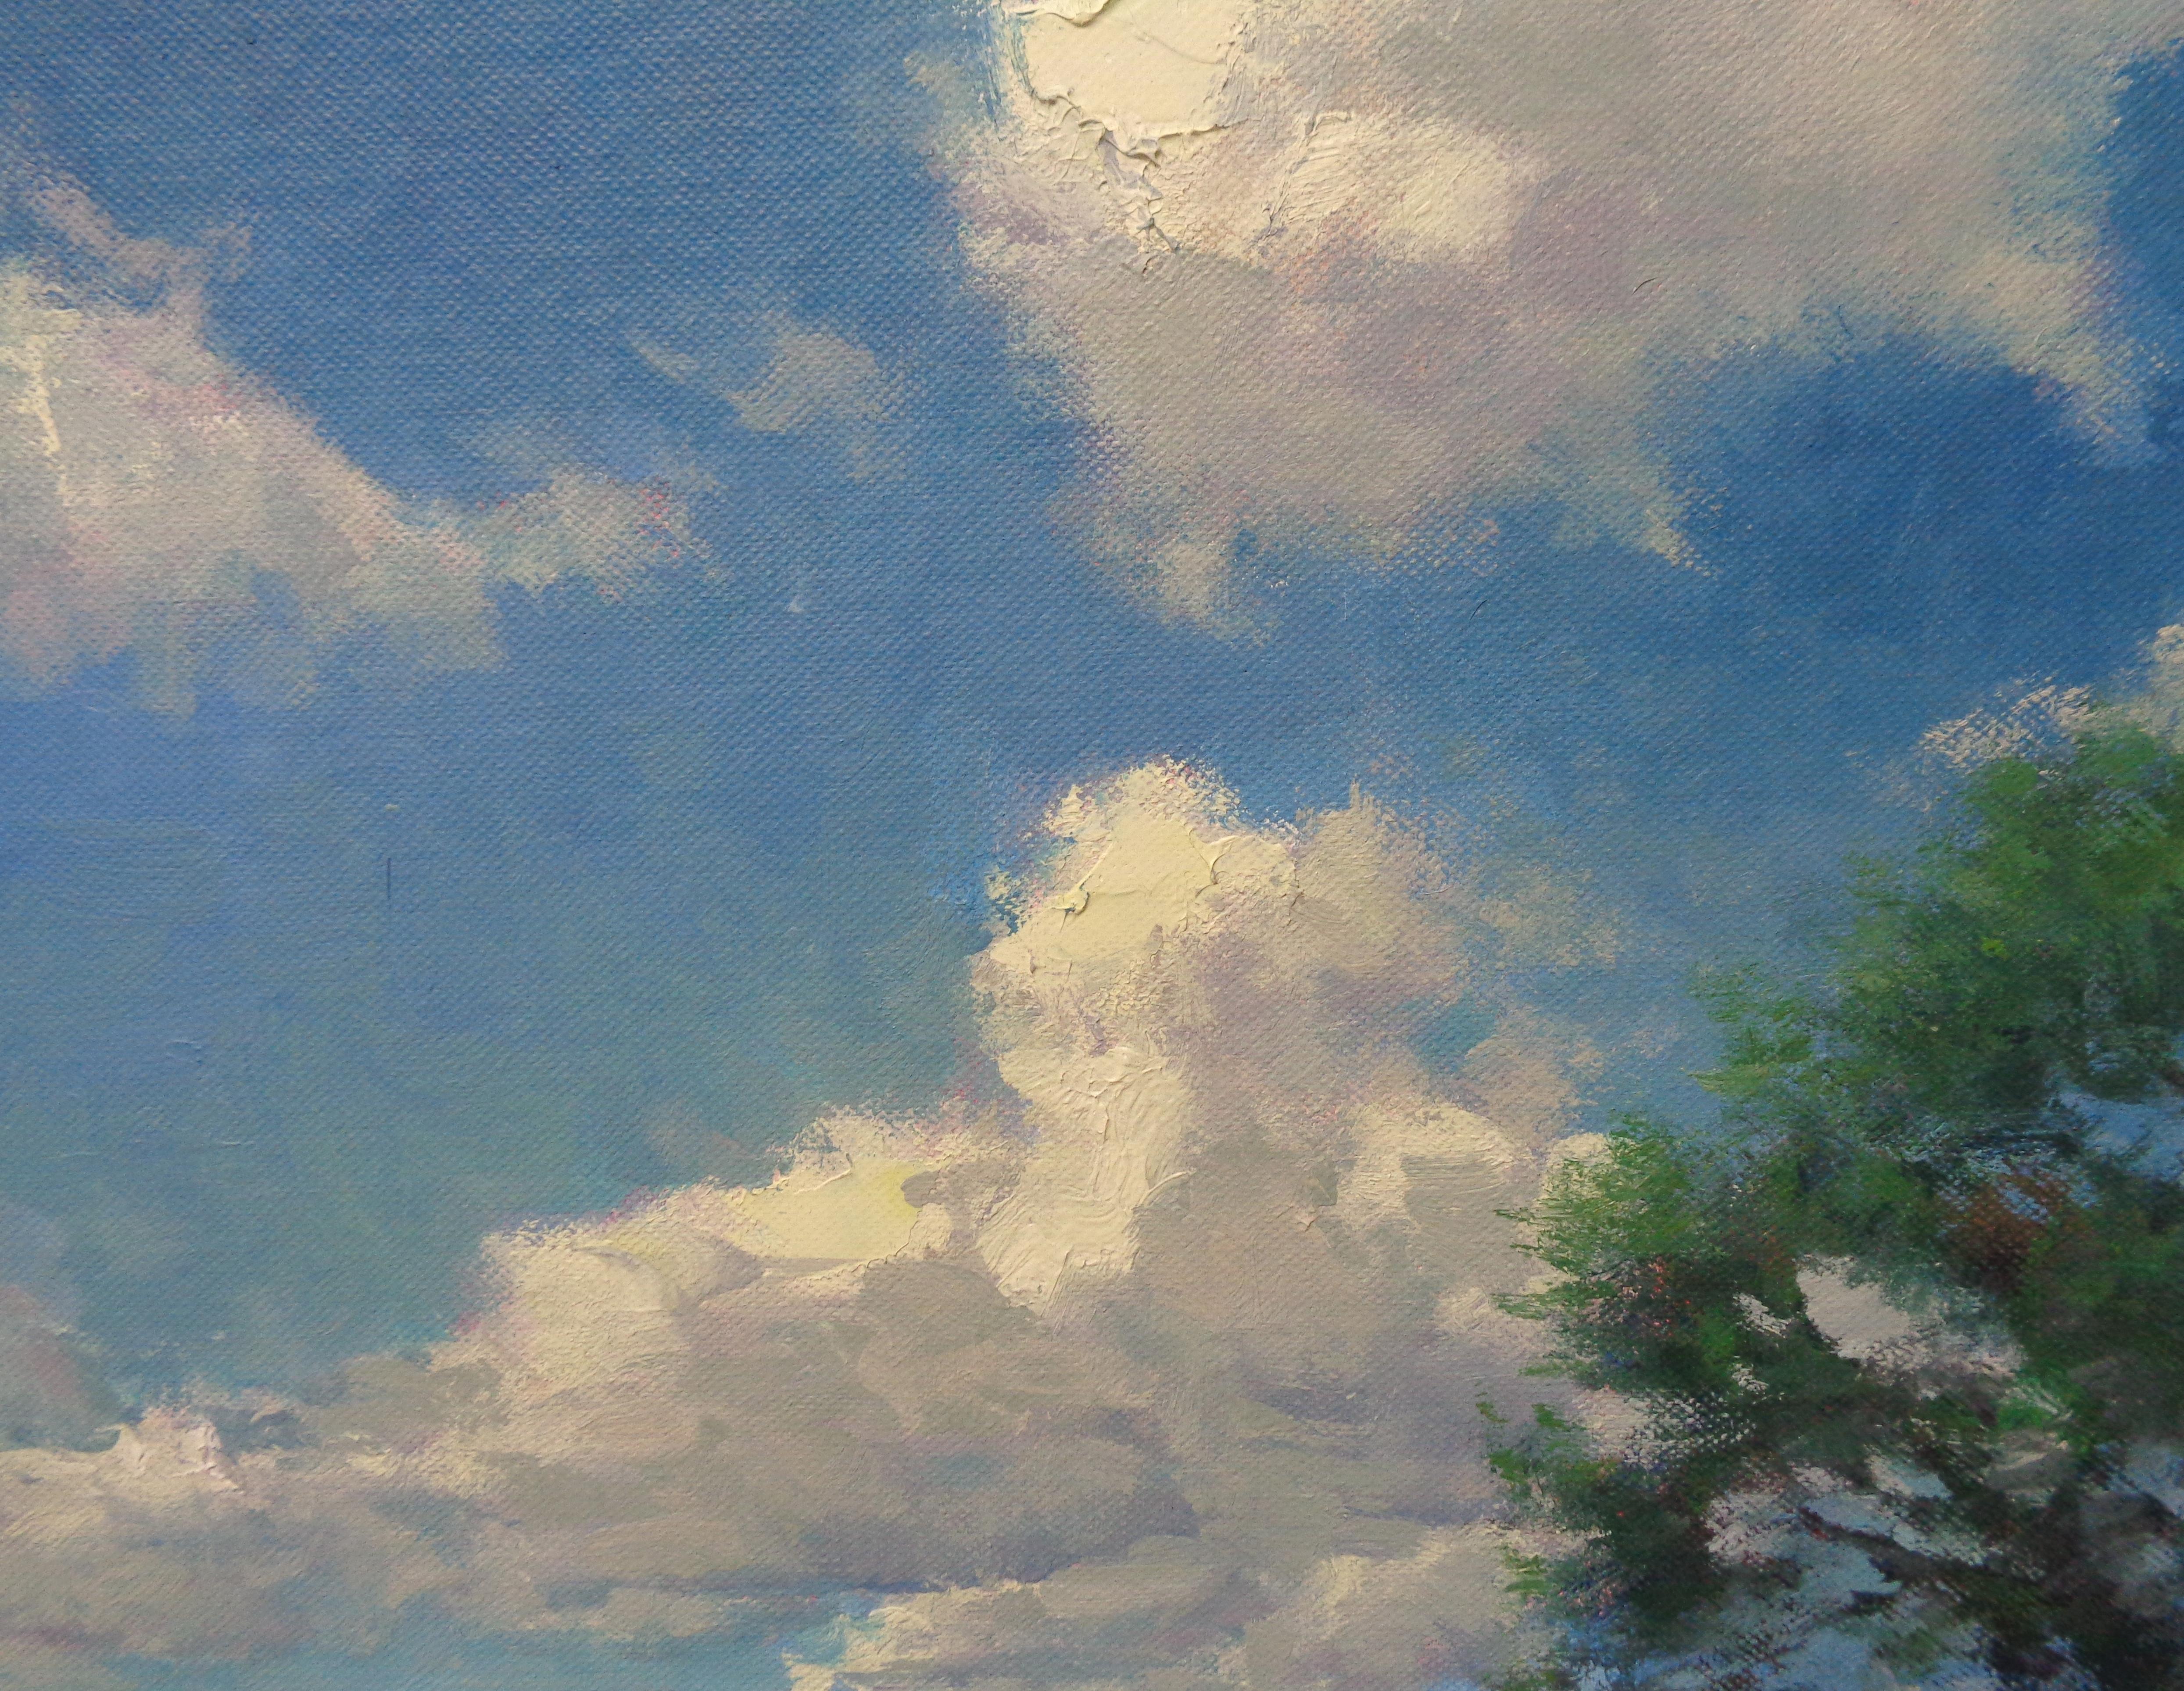 Impressionistic Landscape Oil Painting Summer Sky by Michael Budden  3